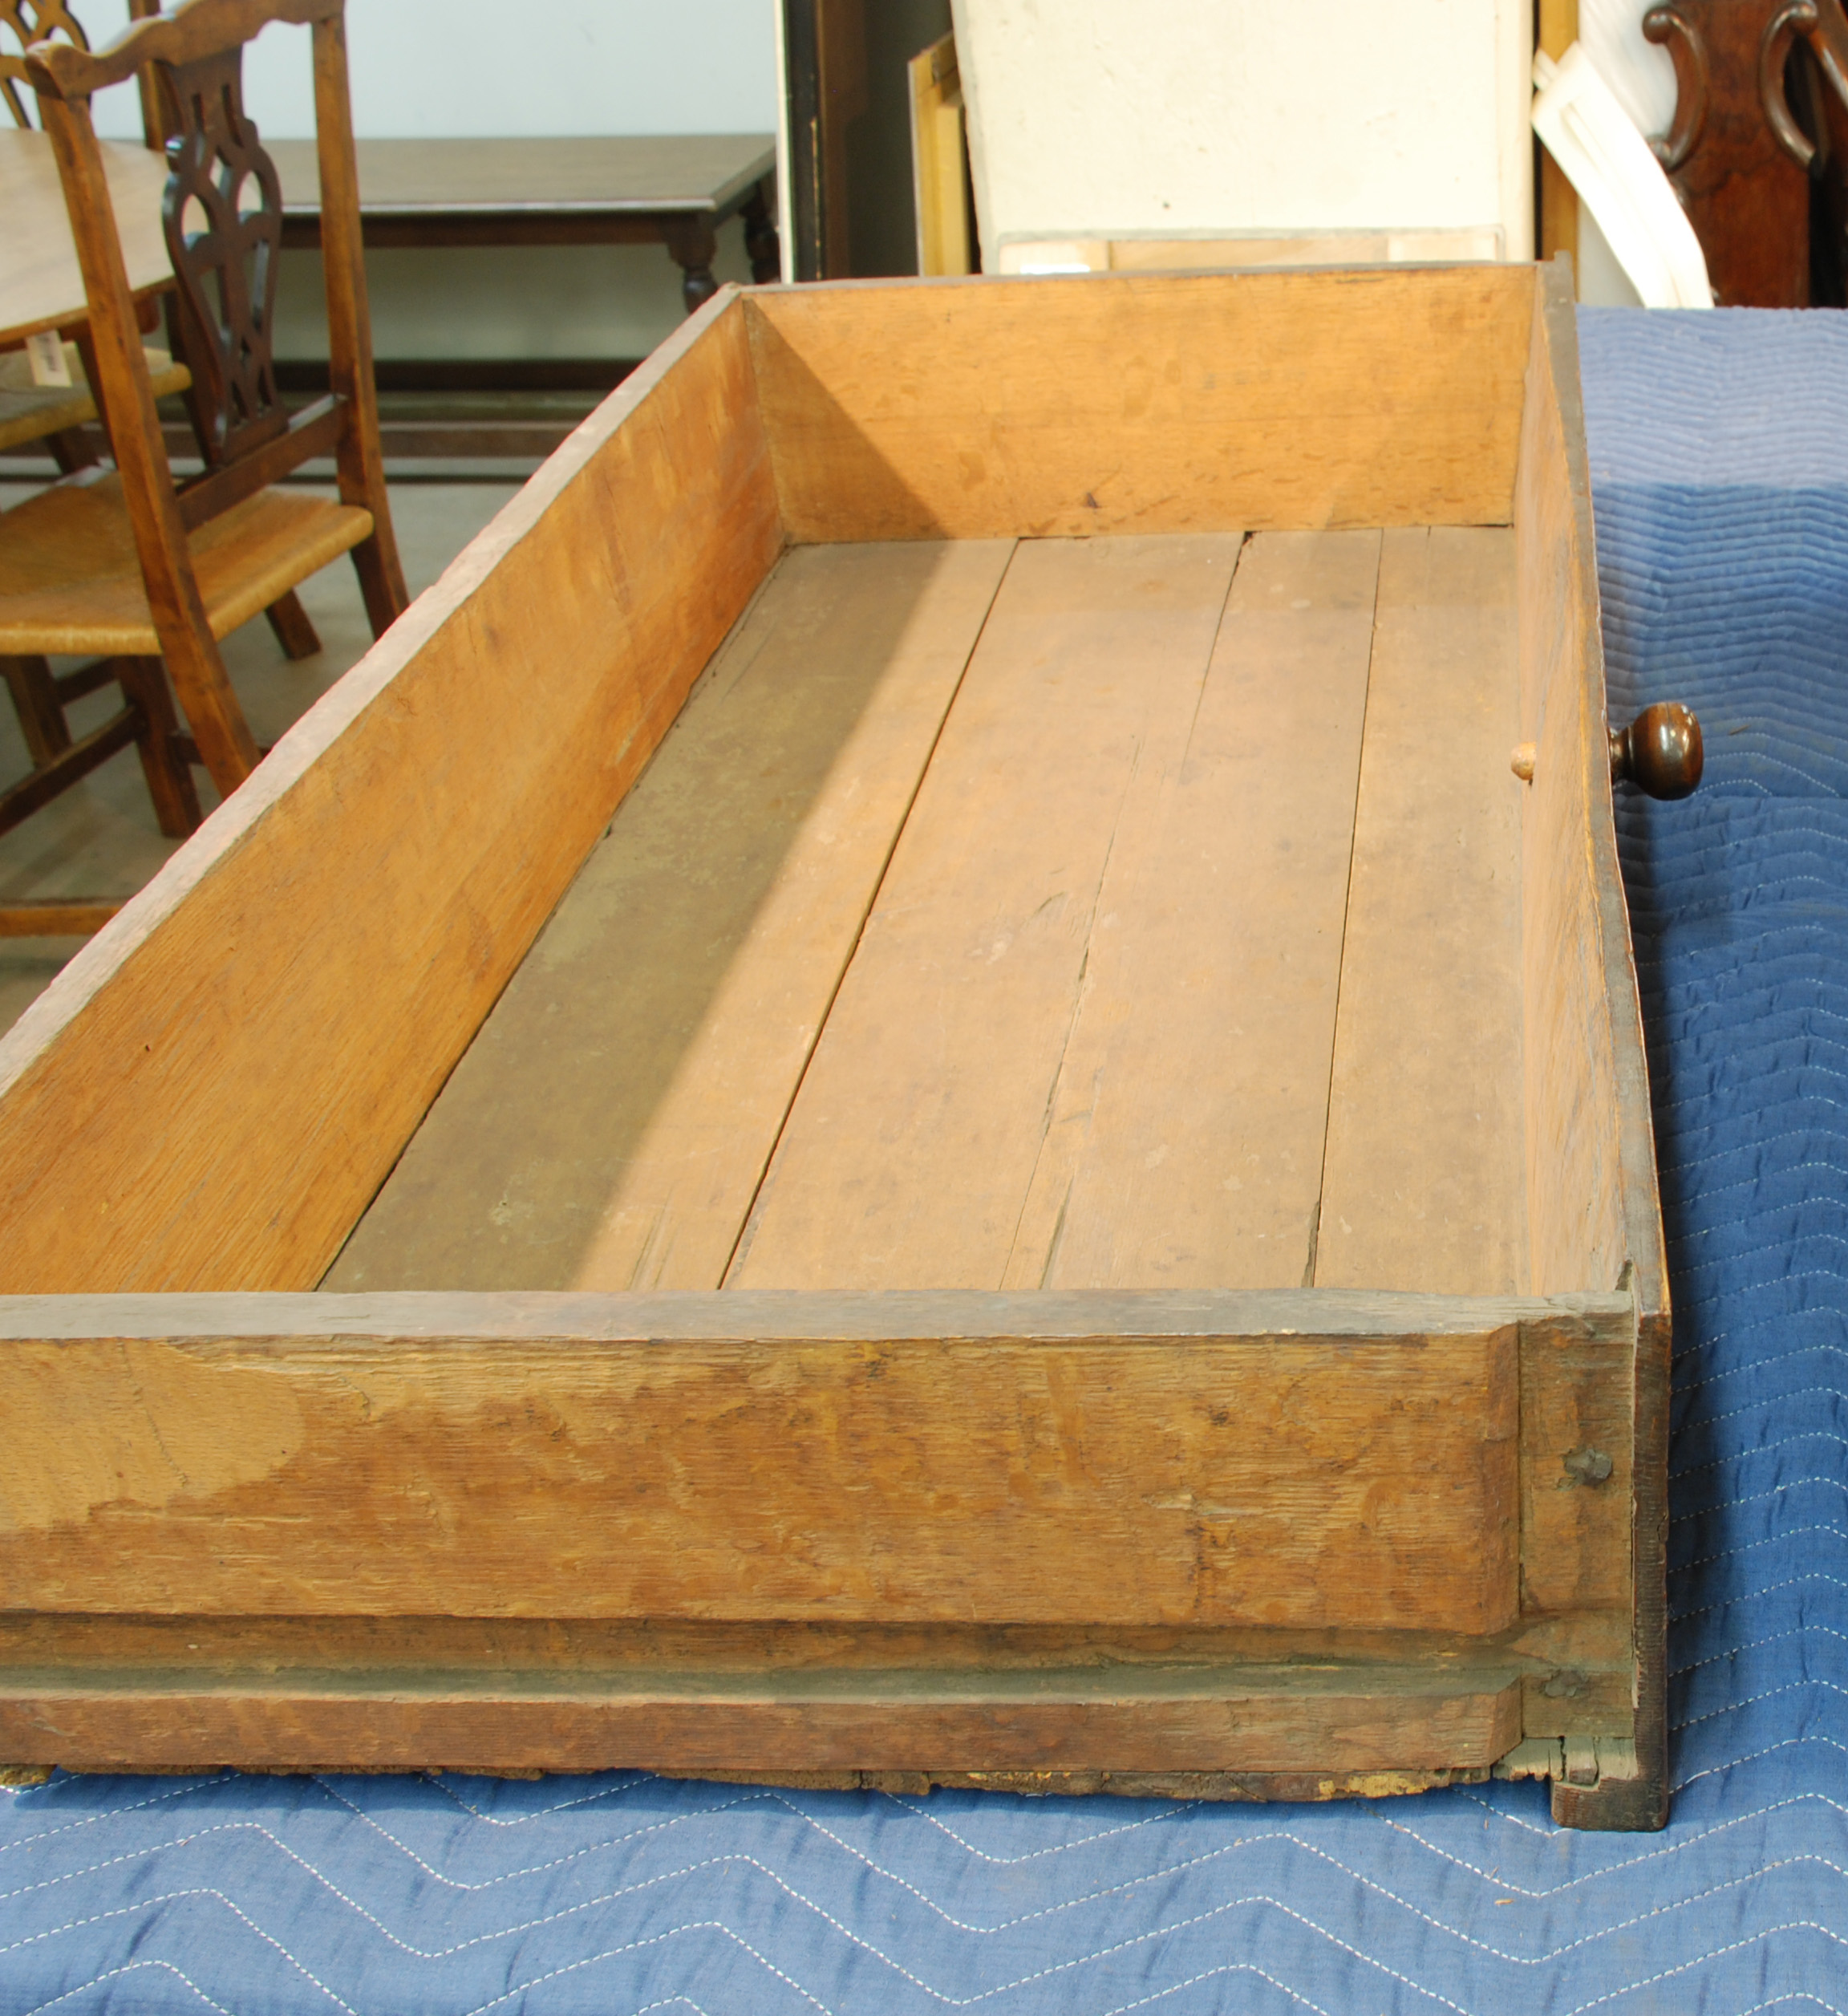 There. Now you know how to make 17th-century New England drawers.